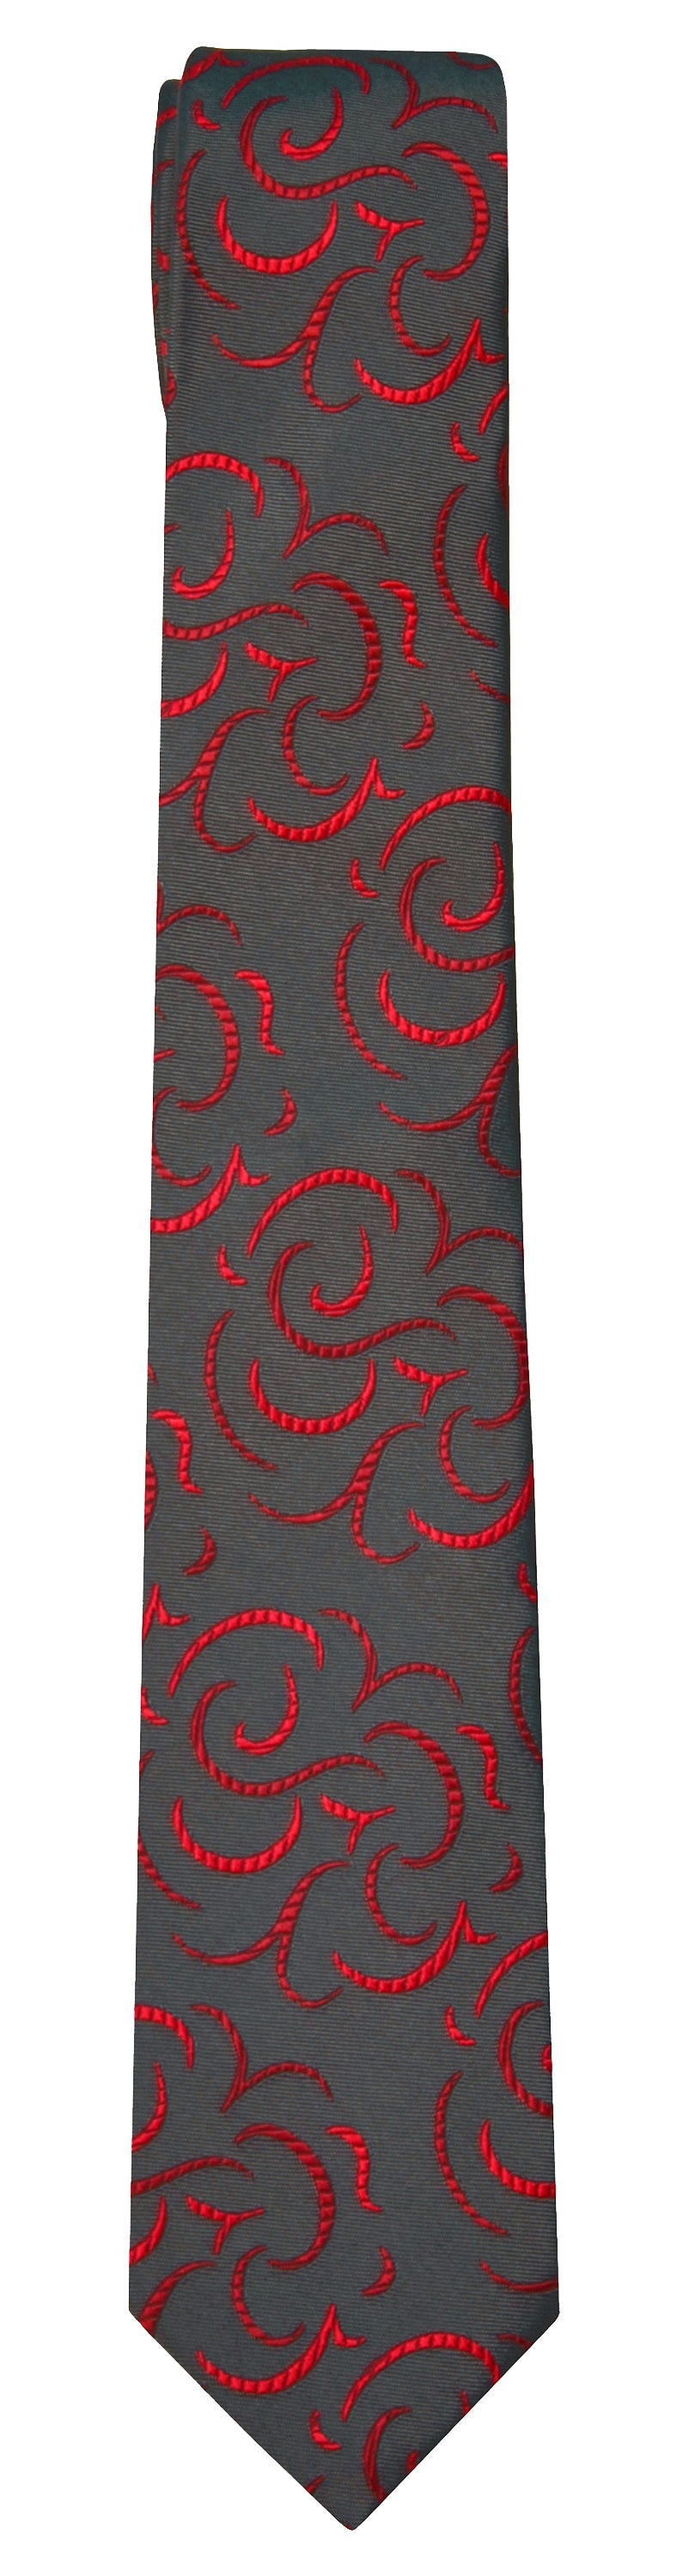 Mimi Fong Silhouette Tie in Charcoal